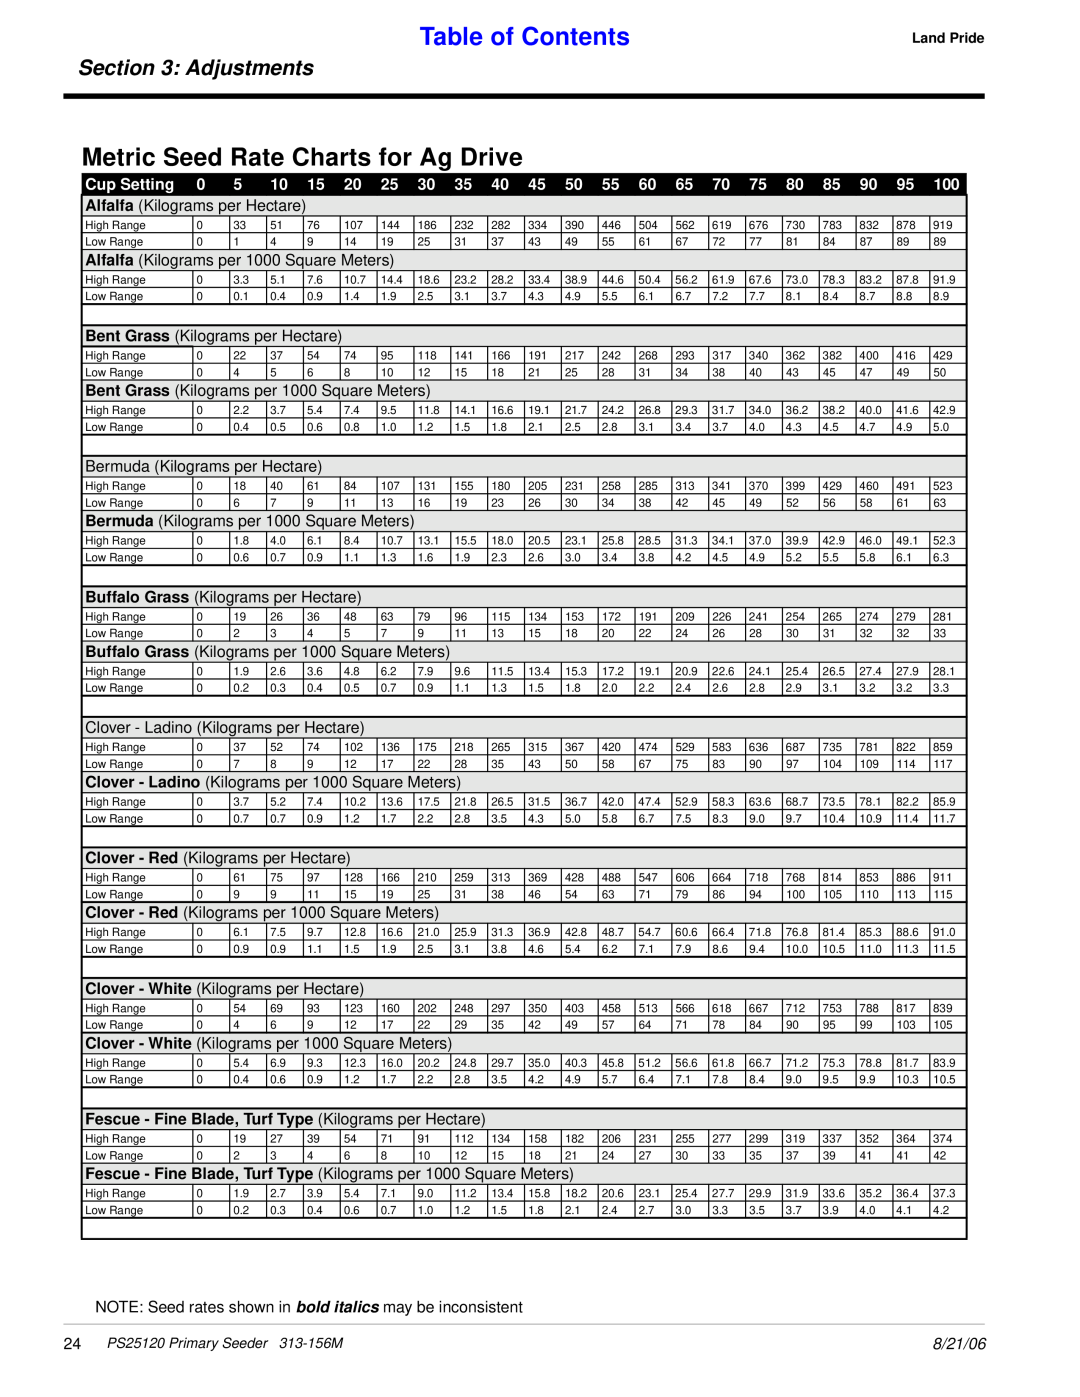 Land Pride PS25120 Metric Seed Rate Charts for Ag Drive, Table of Contents, Adjustments, Clover - Red, Clover - White 